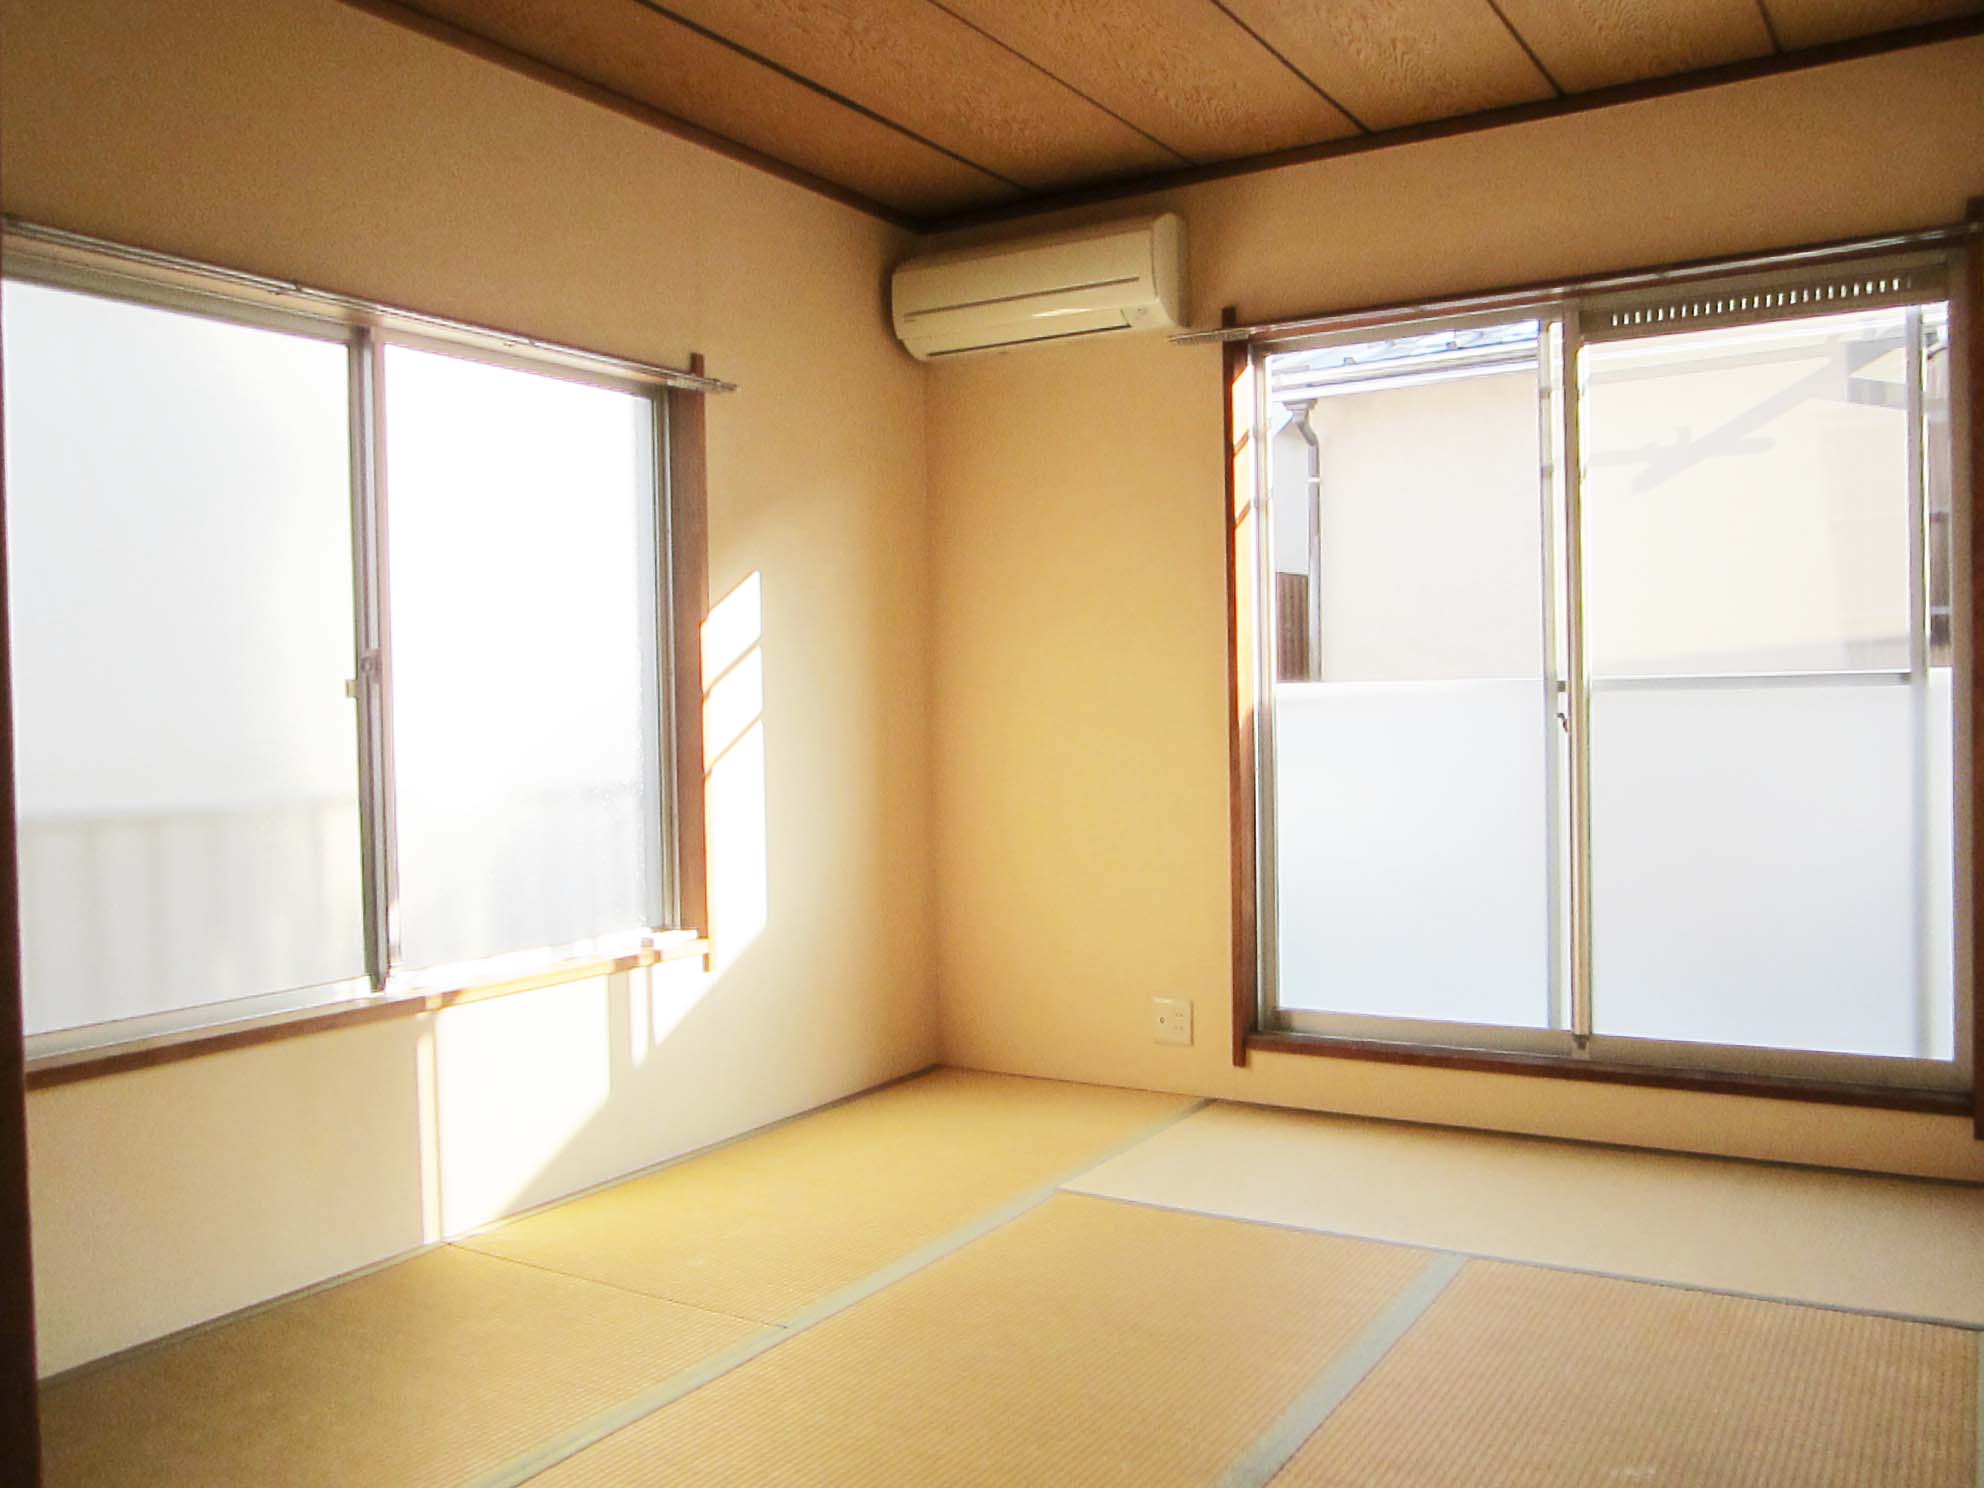 Living and room. Second floor of the Japanese-style room is also bright with two faces lighting